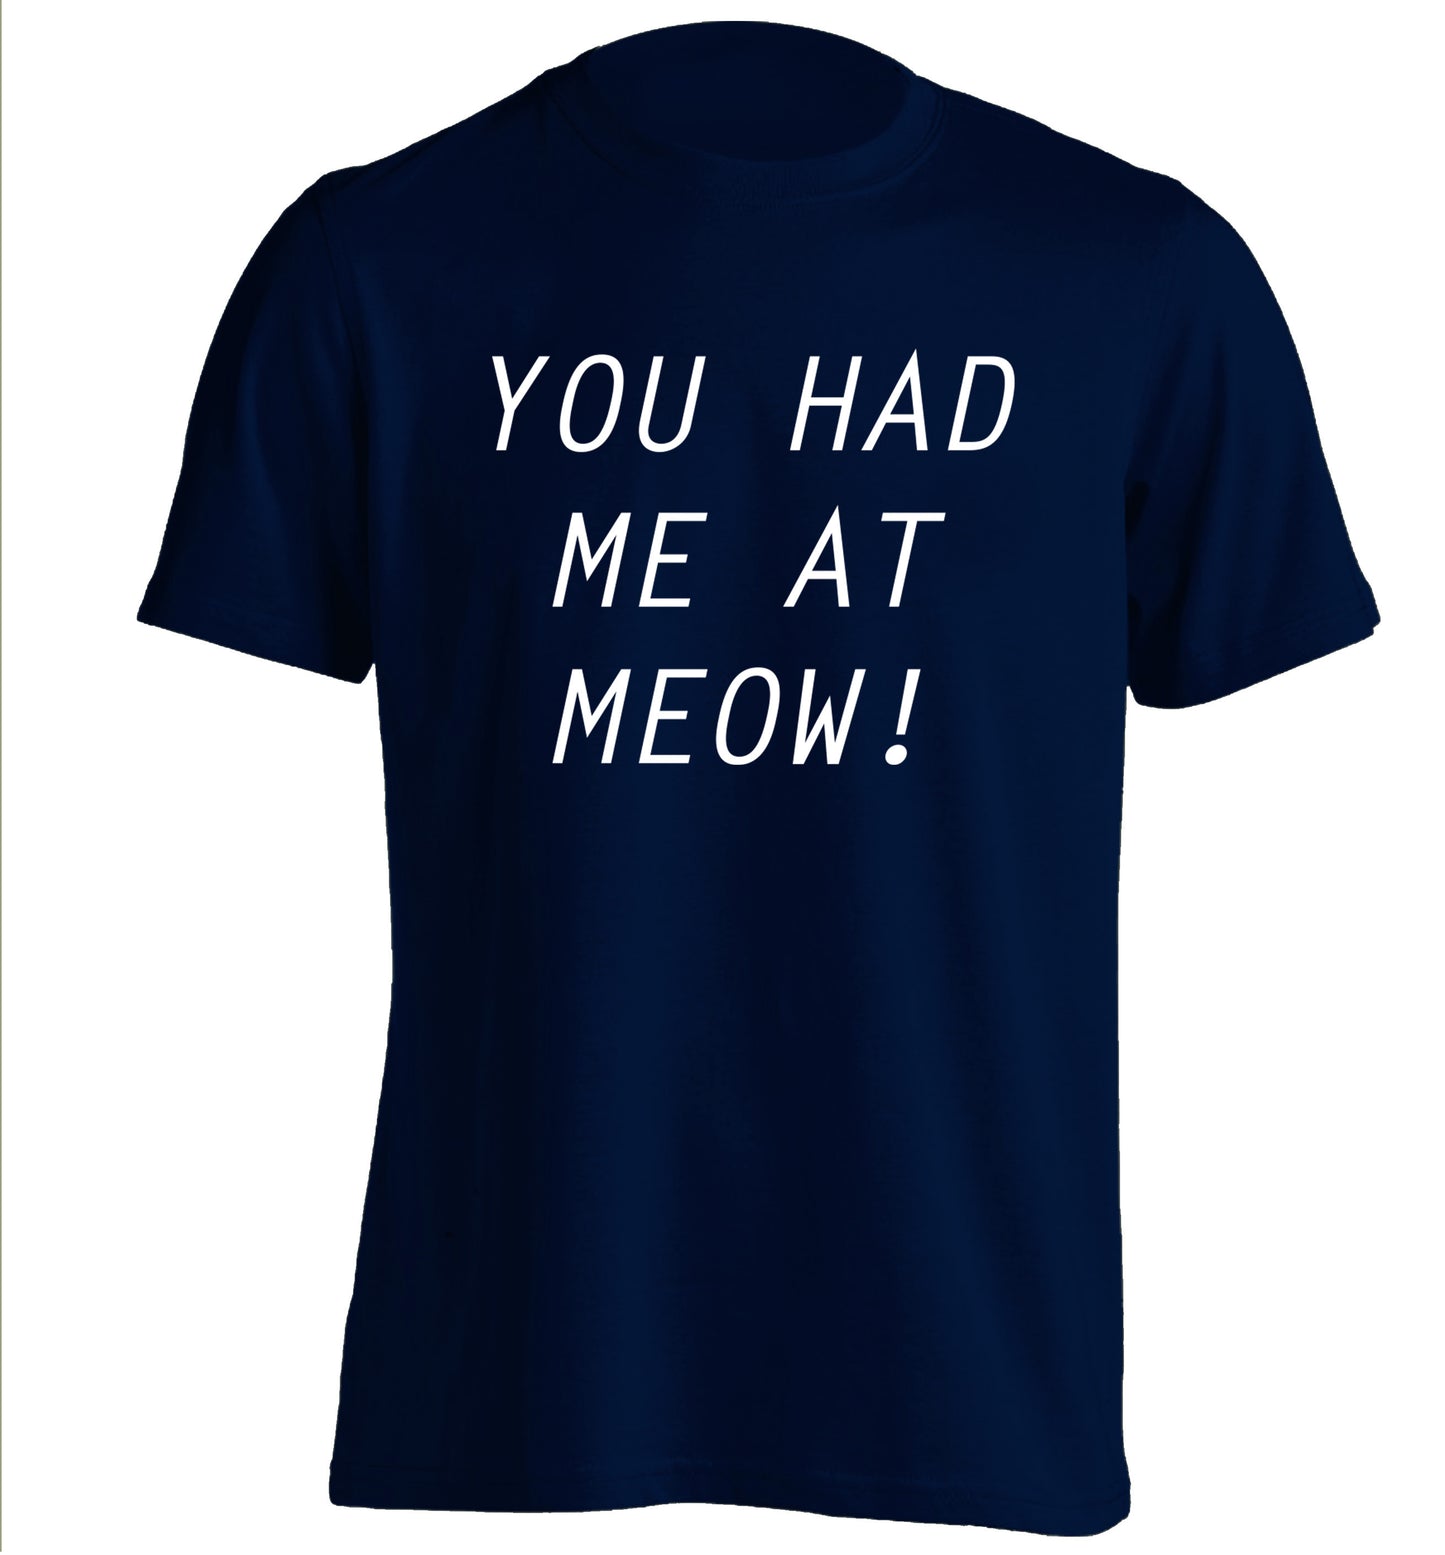 You had me at meow adults unisex navy Tshirt 2XL